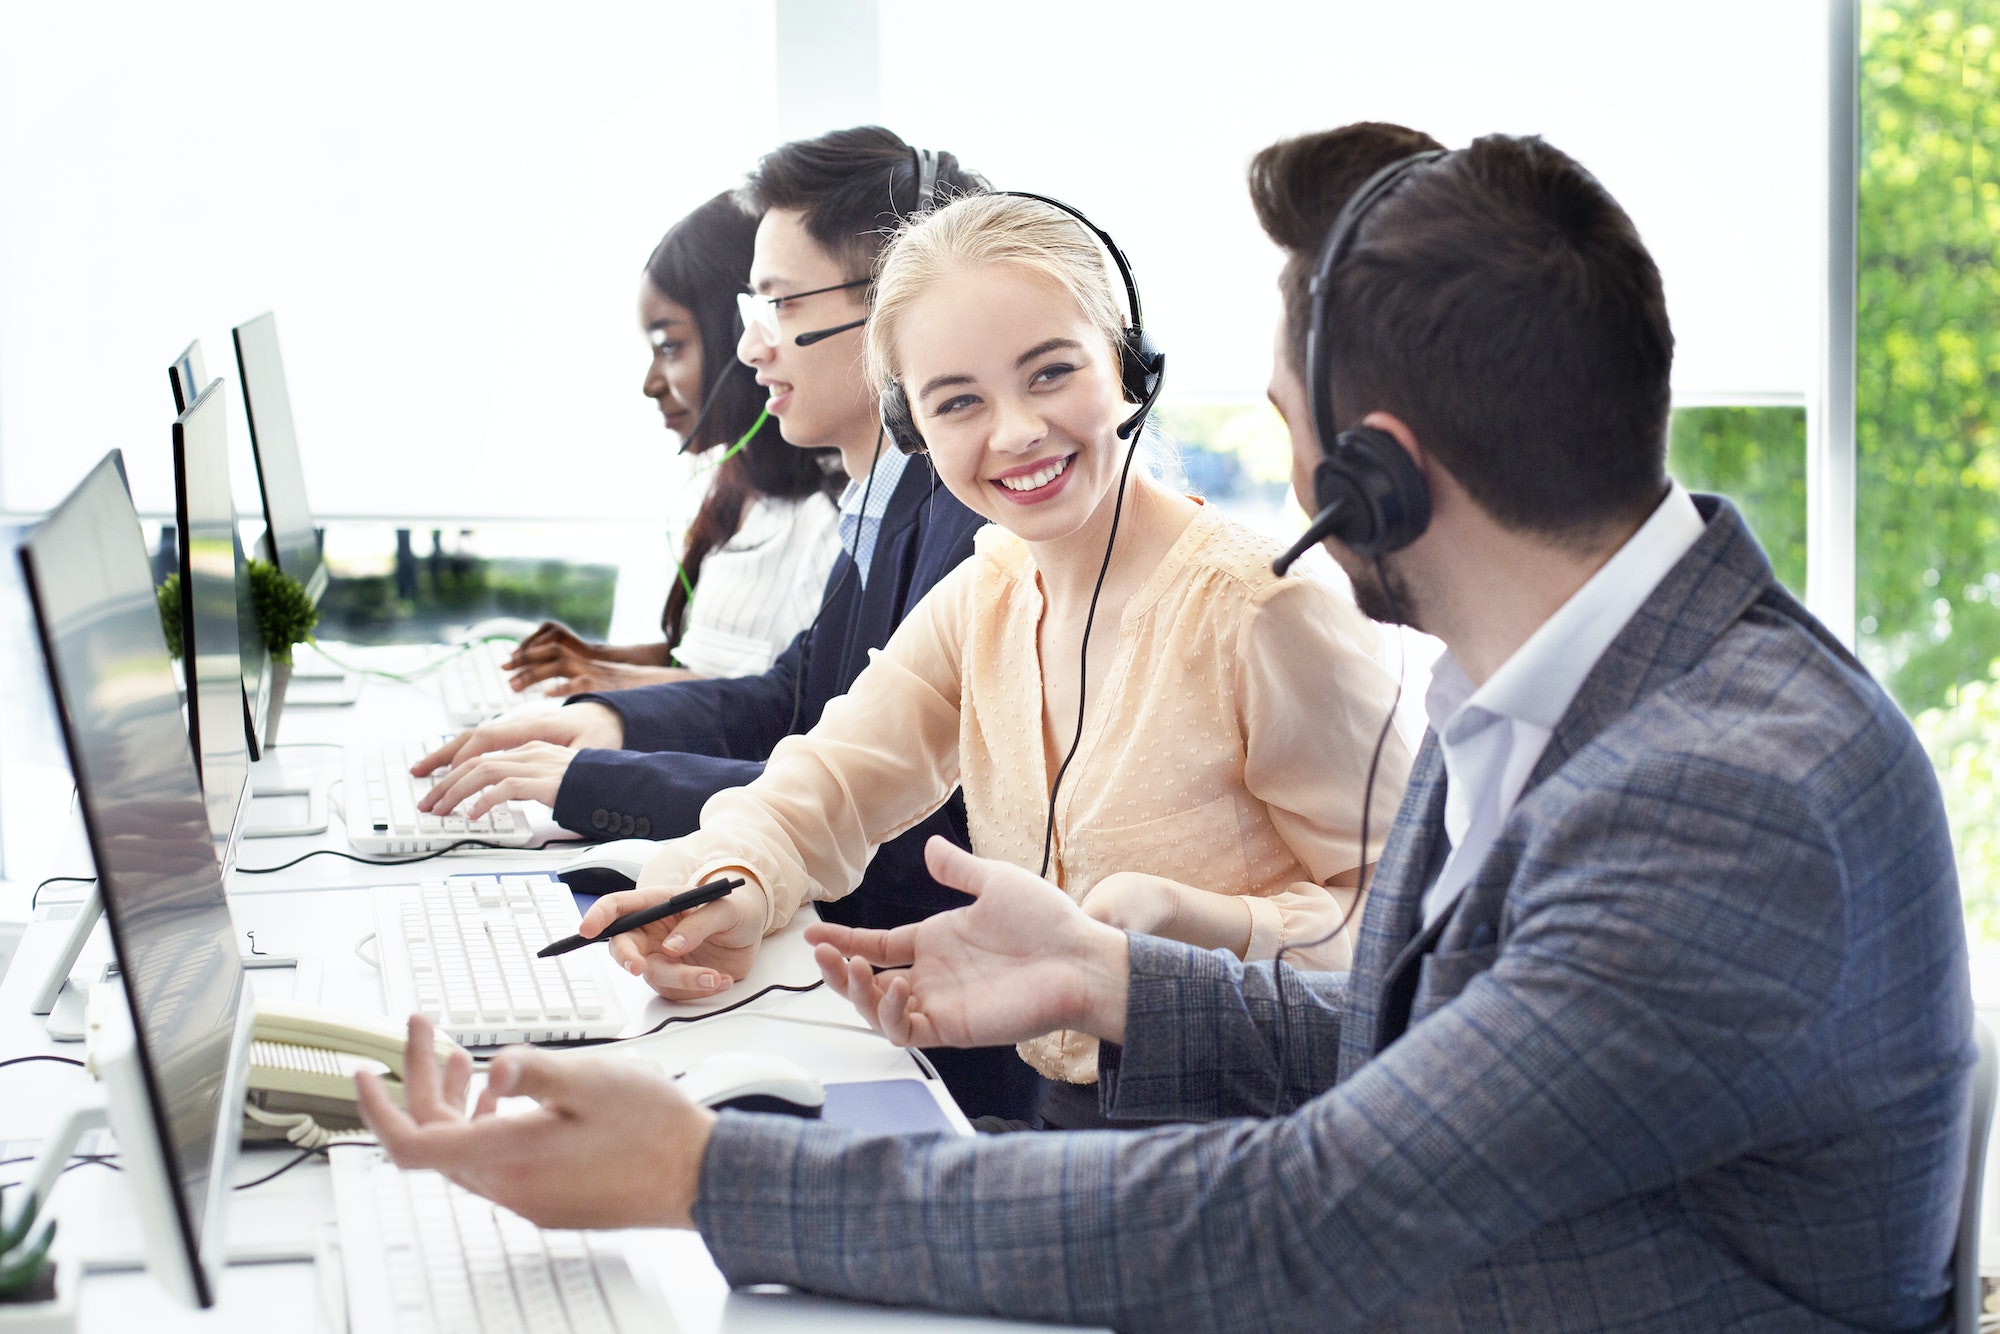 Smiling customer support workers communicating to solve client's problem together at call centre